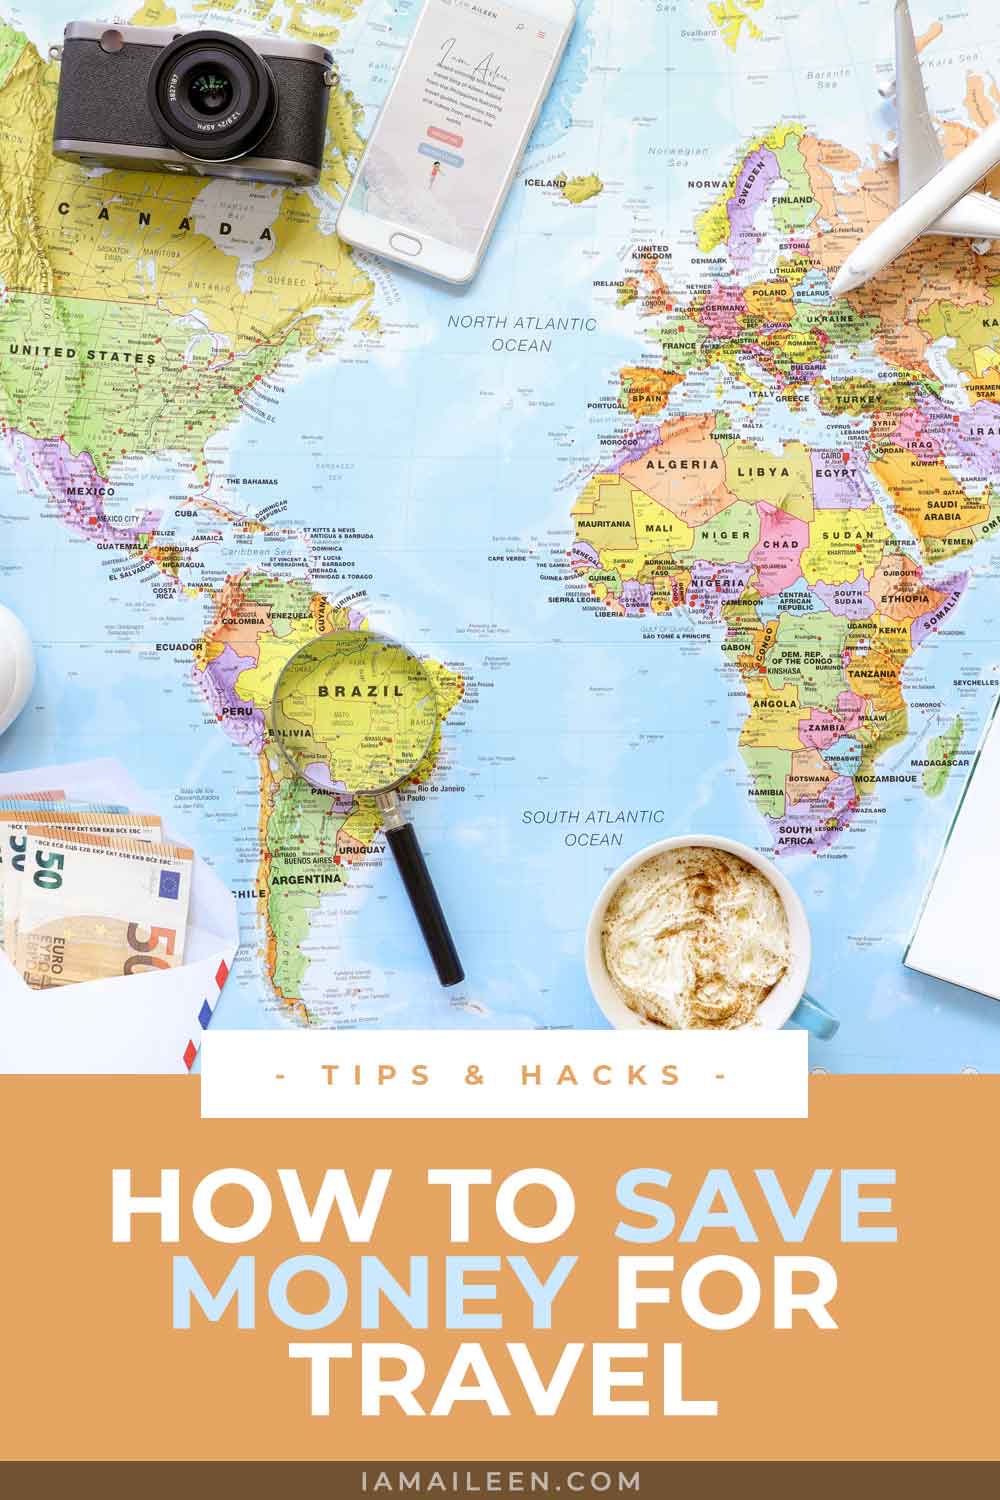 How to Save Money for Travel: Top Money-Saving Tips